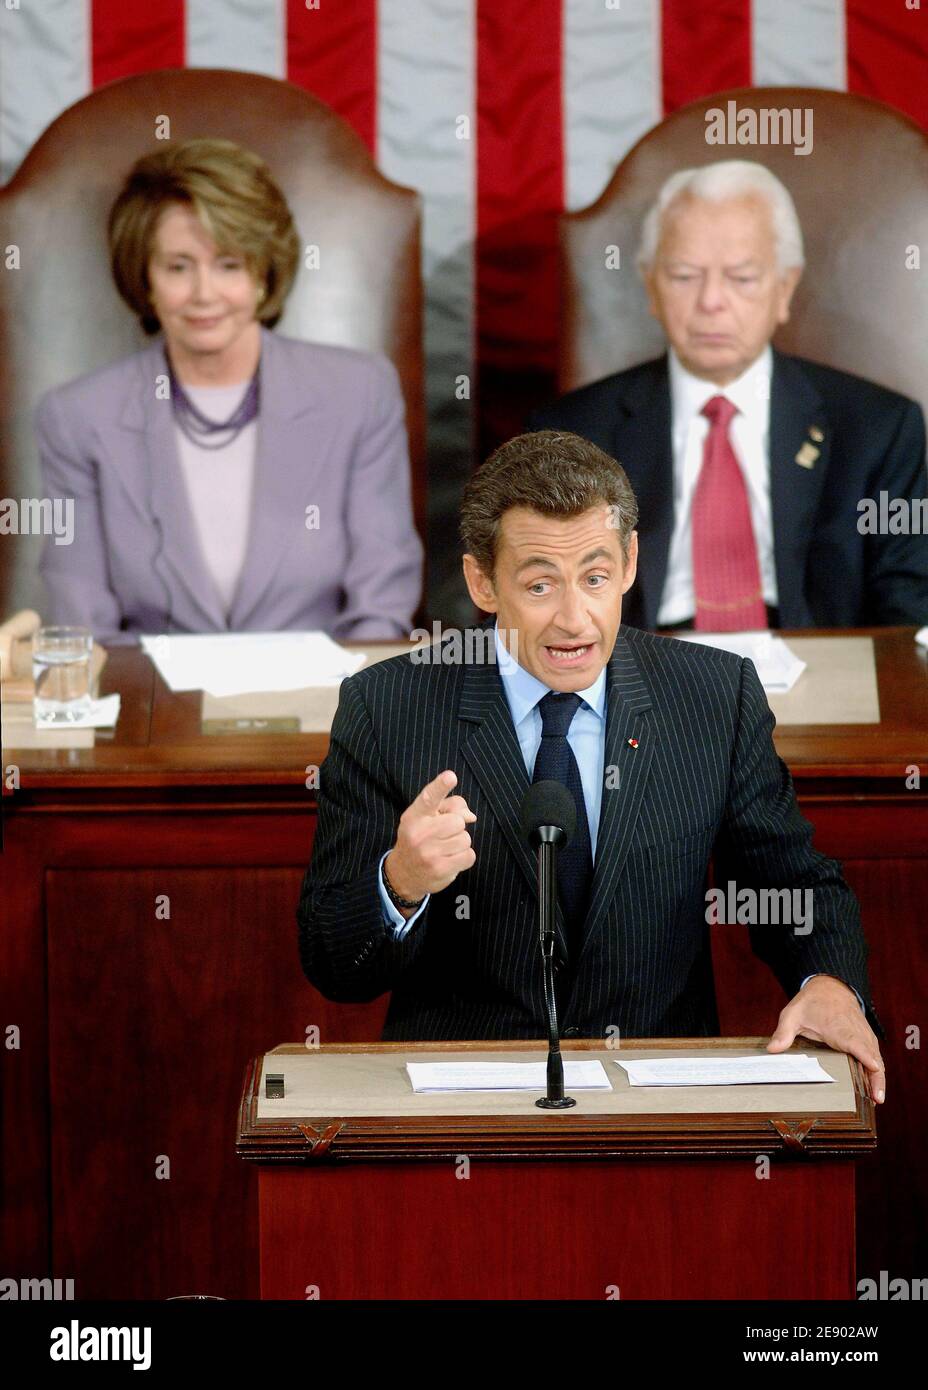 French President Nicolas Sarkozy addresses the US Congress in Washington, DC, USA, on November 2007. Sarkozy's address to Congress, the first by a French leader in eleven years, comes amid improved relations between both countries. US Speaker of the House Nancy Pelosi and Sen. Richard Byrd (D-WVA) are seen in the background. Photo by Olivier Douliery/ABACAPRESS.COM Stock Photo